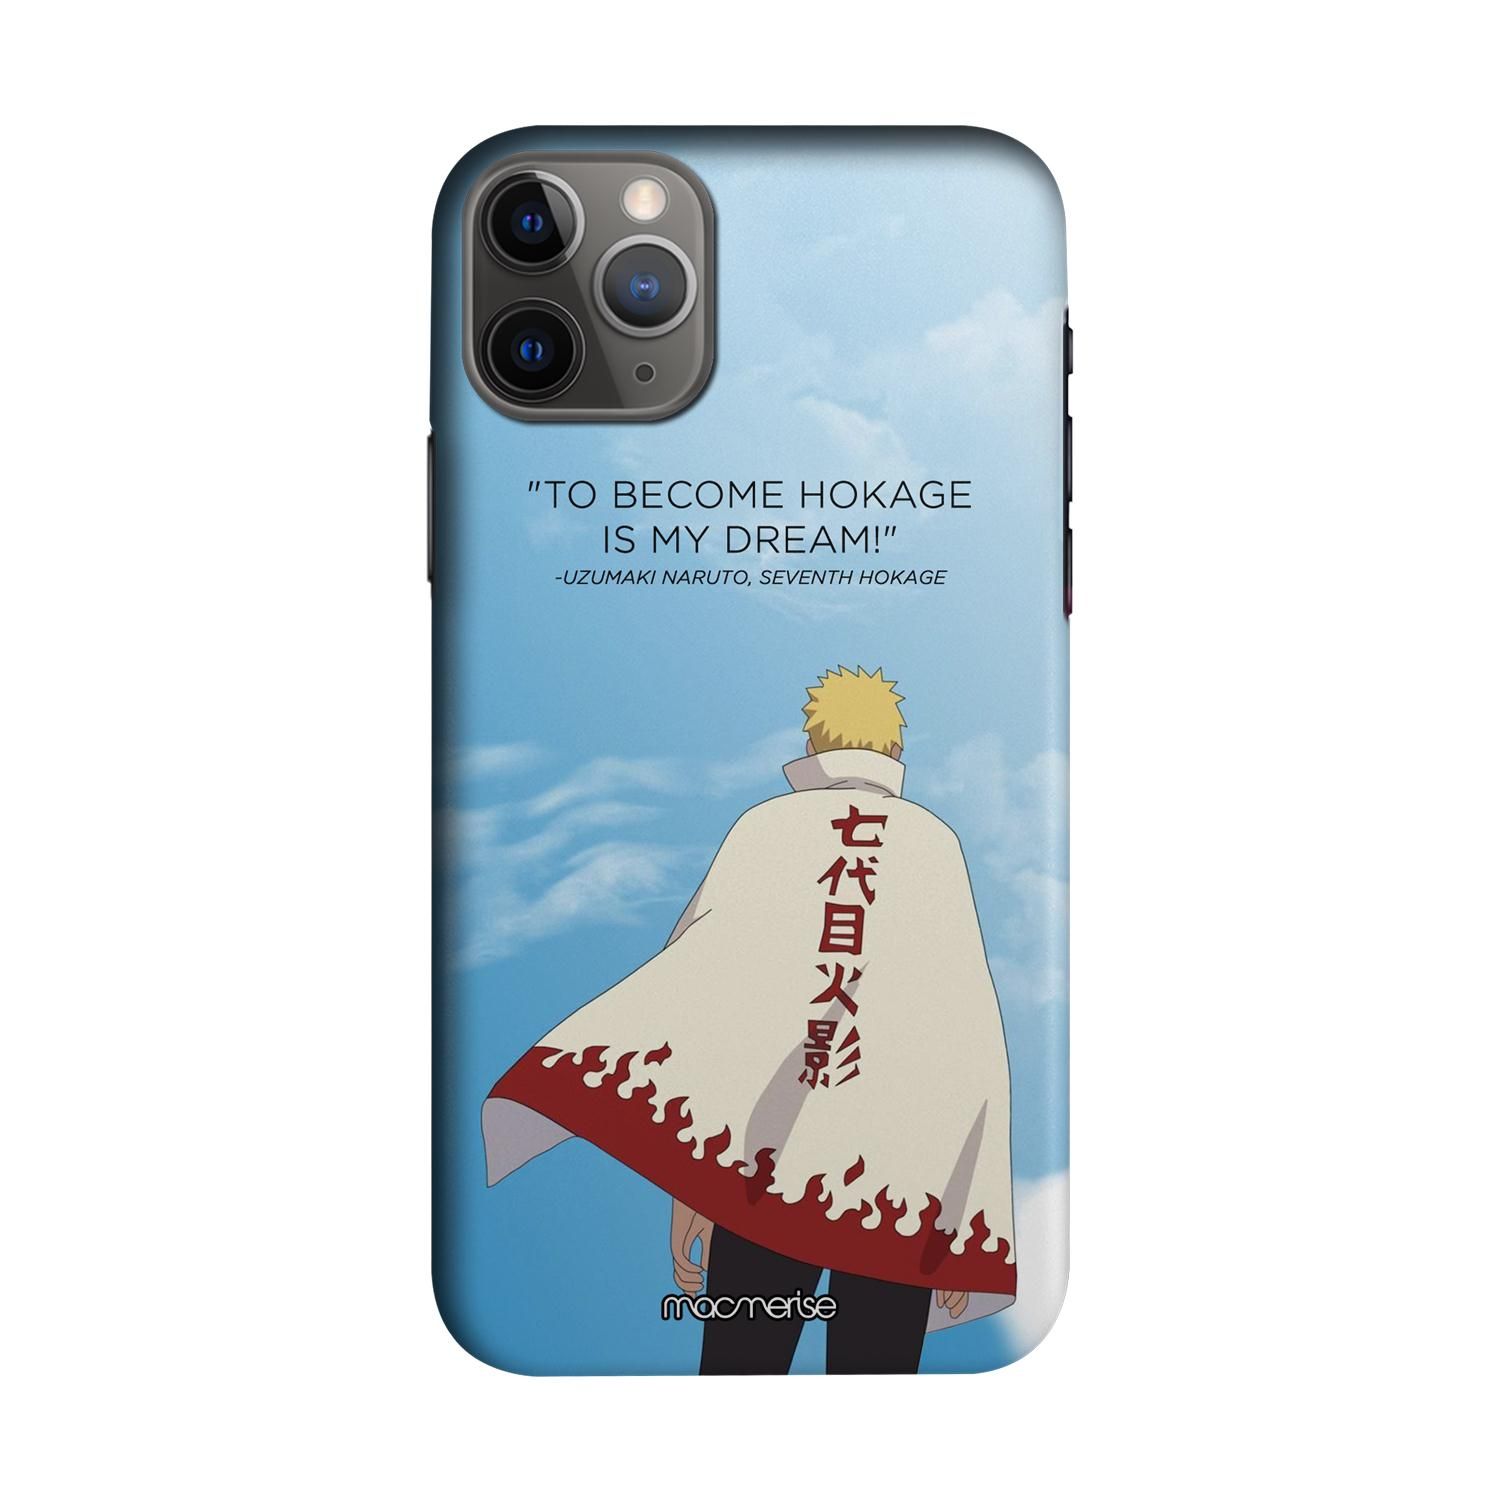 Buy 7th Hokage - Sleek Phone Case for iPhone 11 Pro Max Online